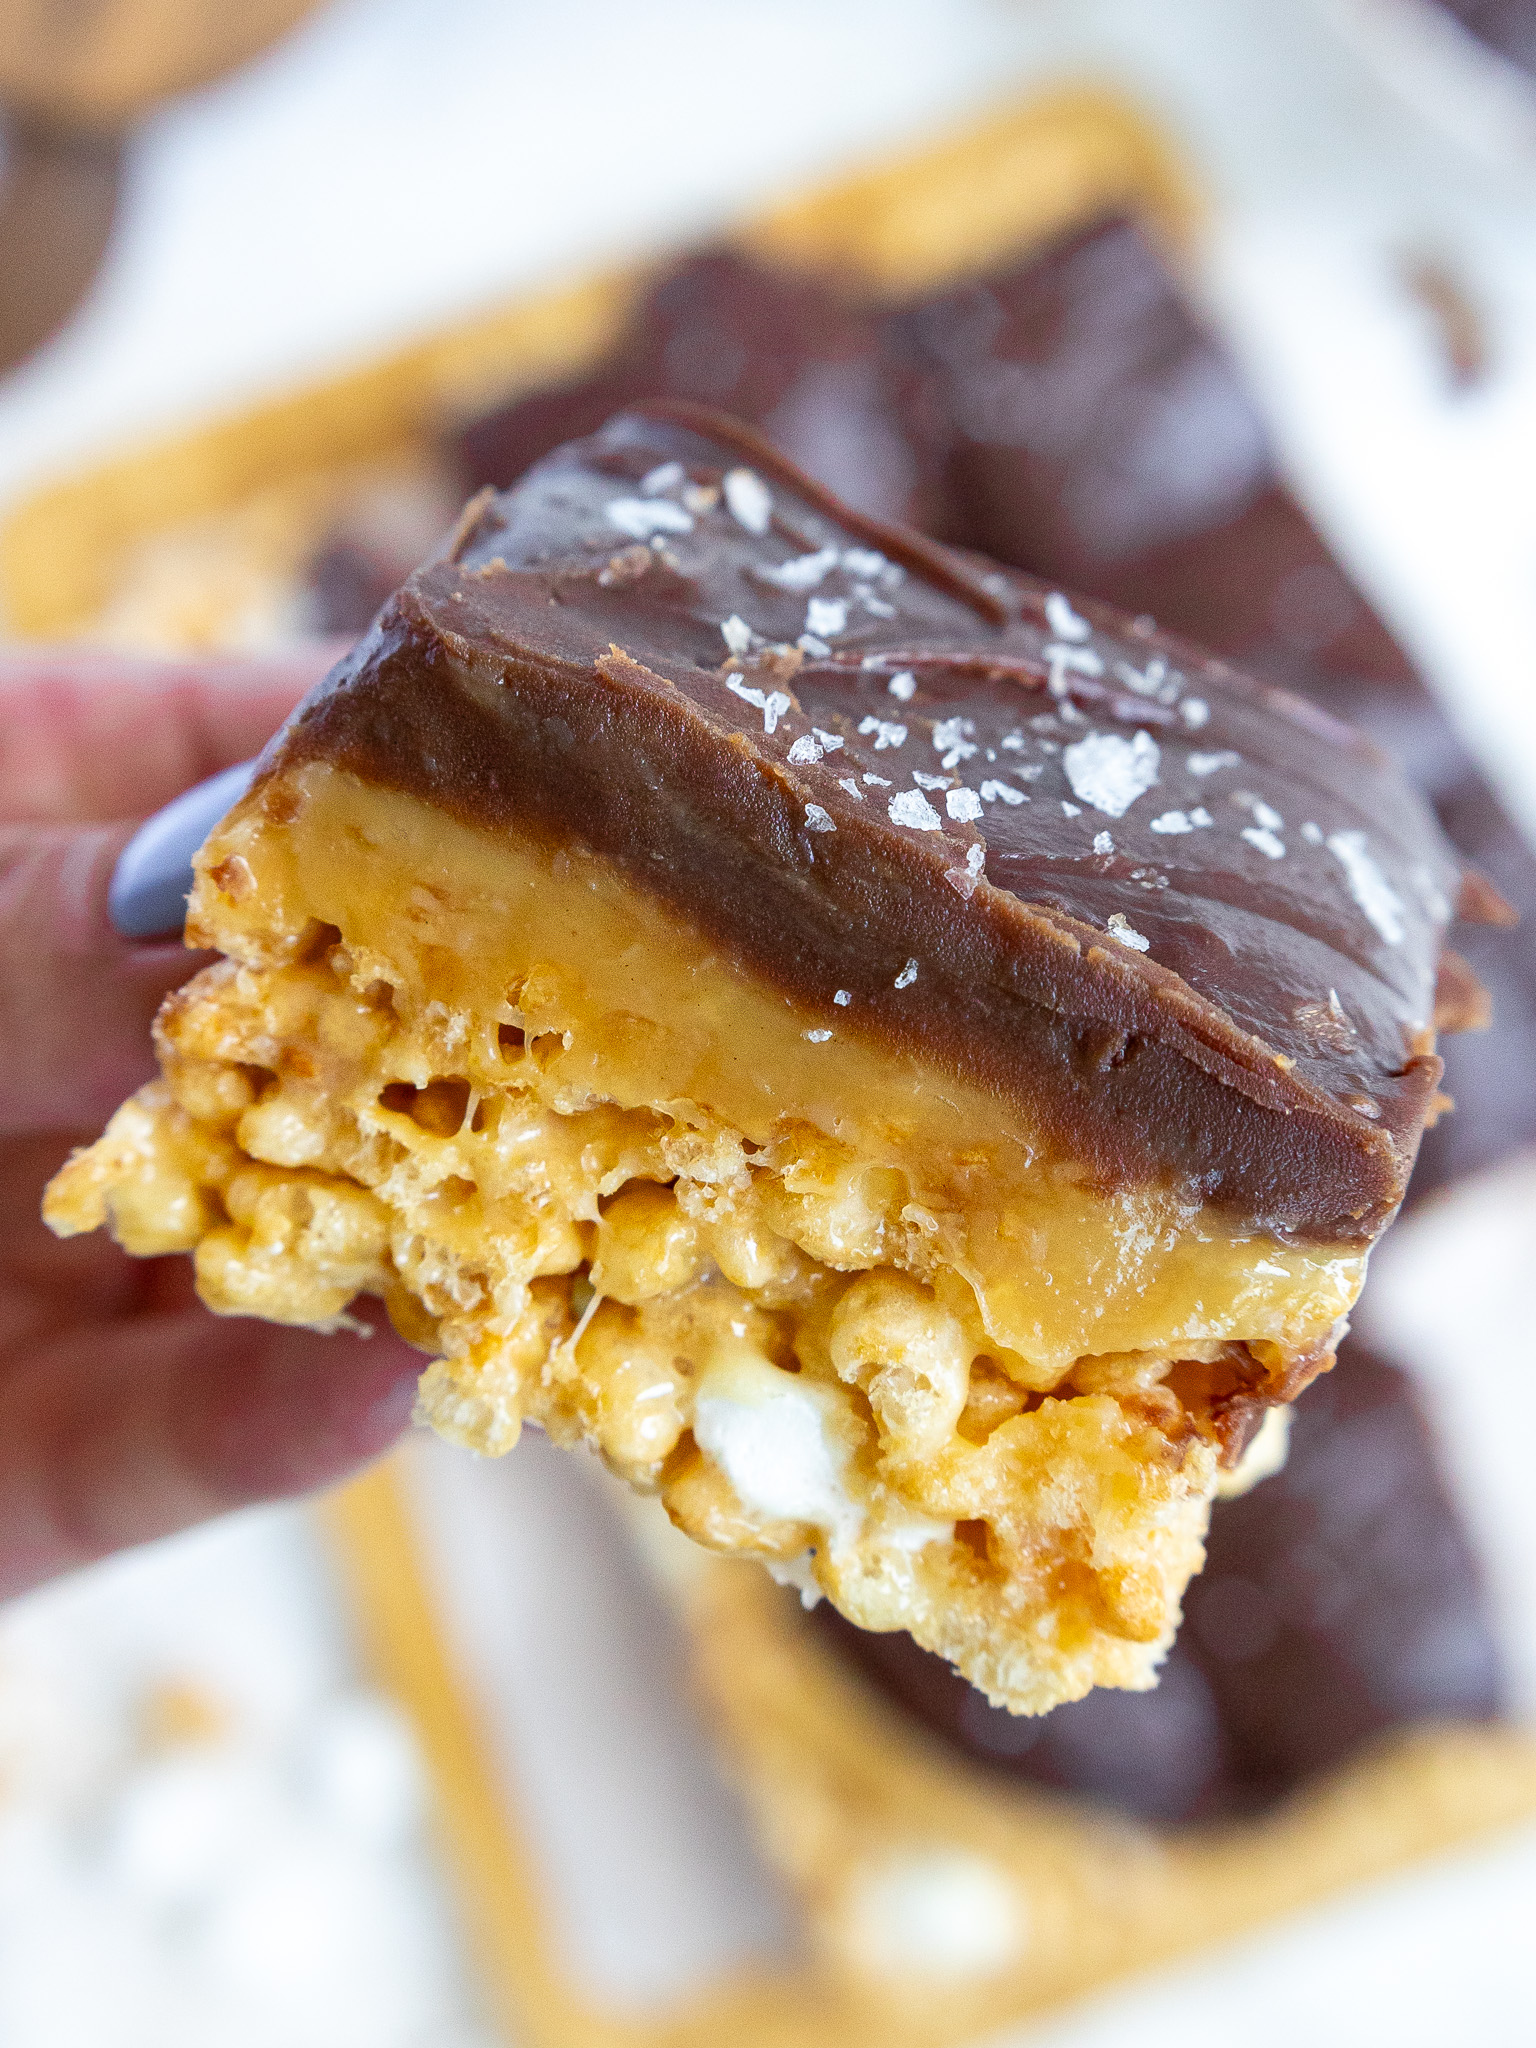 image of caramel chocolate rice krispies that have been cut to show their layers of caramel and chocolate ganache